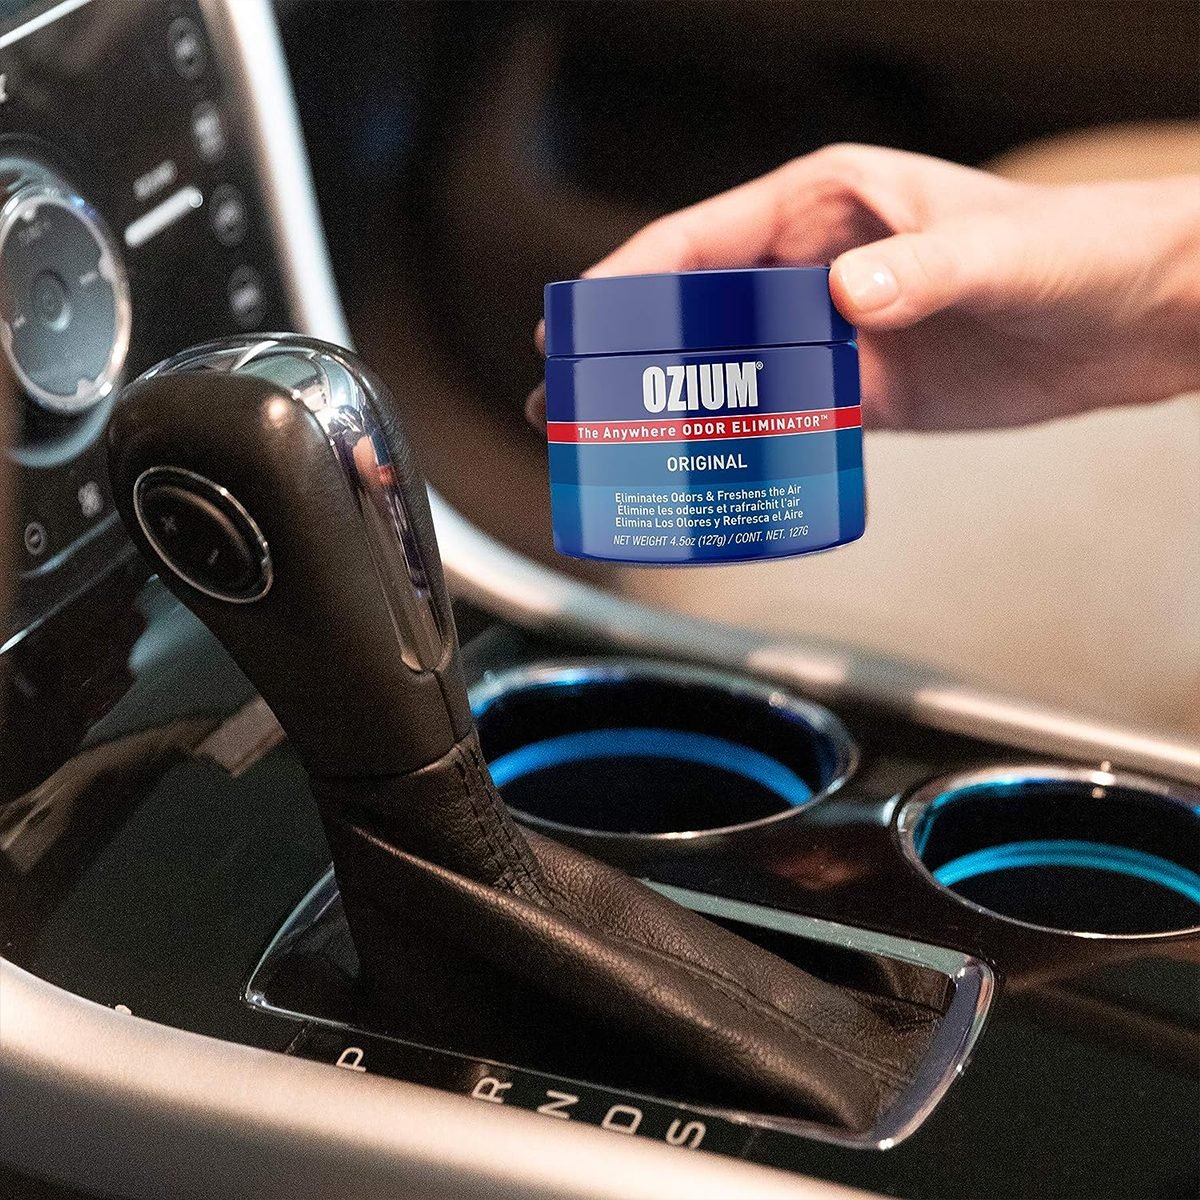 New Car Smell Fading? Try These Best Car Perfumes Instead